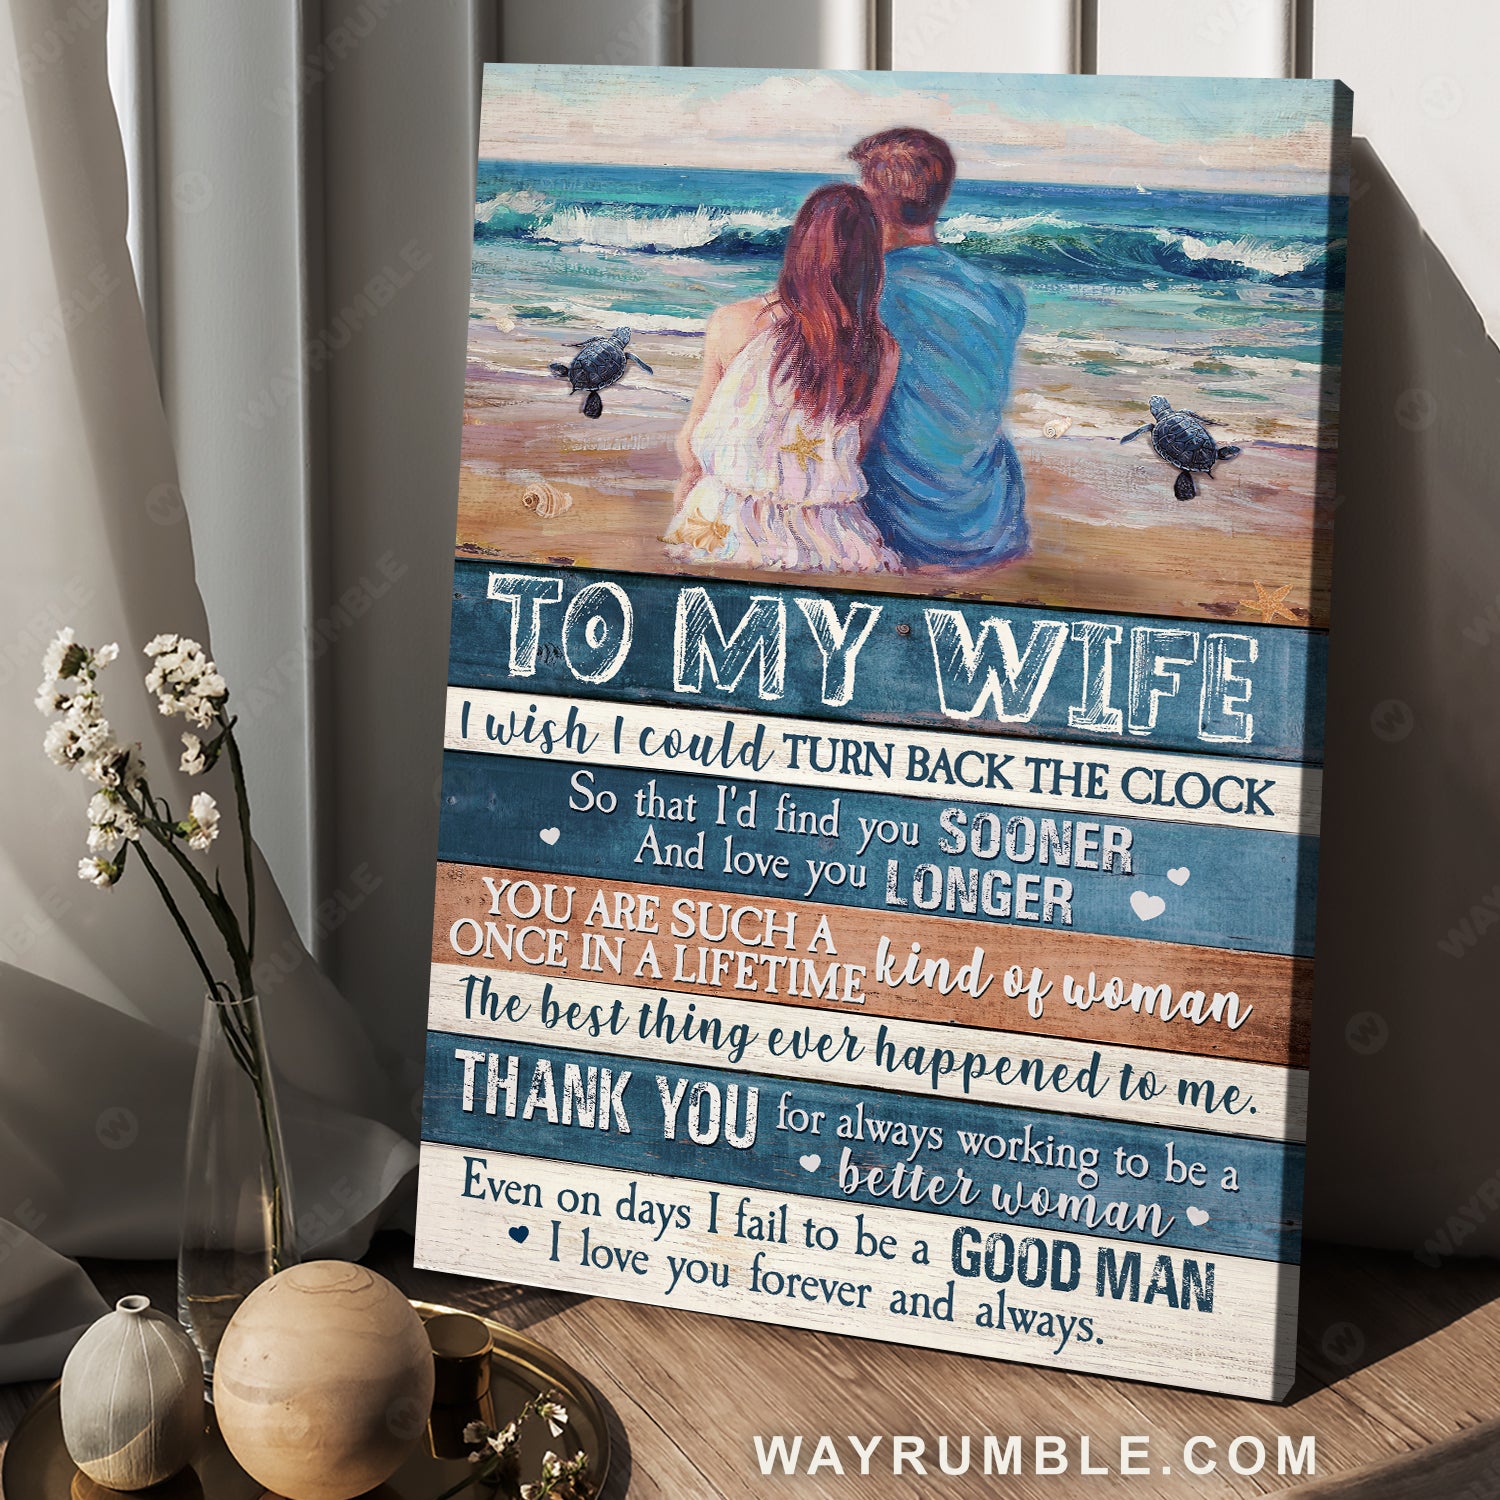 To my wife, Couple drawing, Ocean view, I love you forever and always - Family Portrait Canvas Prints, Wall Art